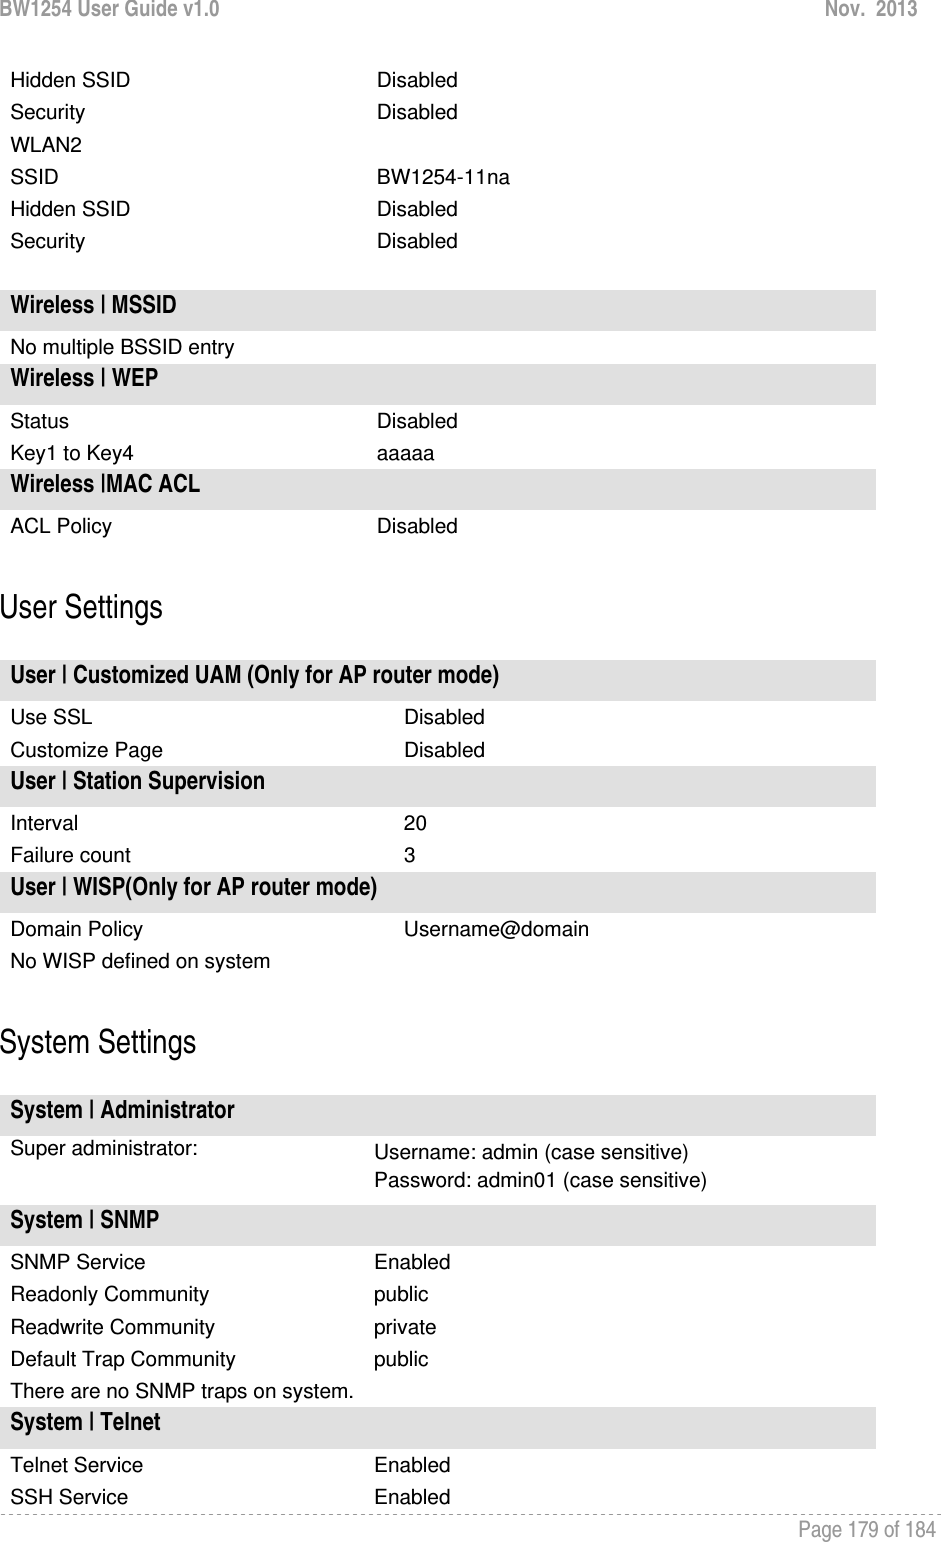 BW1254 User Guide v1.0  Nov.  2013     Page 179 of 184   Hidden SSID   Disabled Security  Disabled WLAN2   SSID  BW1254-11na Hidden SSID   Disabled Security  Disabled    Wireless | MSSID     No multiple BSSID entry Wireless | WEP     Status  Disabled Key1 to Key4  aaaaa Wireless |MAC ACL   ACL Policy  Disabled  User Settings  User | Customized UAM (Only for AP router mode) Use SSL  Disabled Customize Page  Disabled User | Station Supervision Interval 20 Failure count  3 User | WISP(Only for AP router mode) Domain Policy  Username@domain No WISP defined on system  System Settings  System | Administrator Super administrator:  Username: admin (case sensitive) Password: admin01 (case sensitive) System | SNMP SNMP Service  Enabled Readonly Community  public Readwrite Community  private Default Trap Community  public There are no SNMP traps on system. System | Telnet Telnet Service  Enabled SSH Service  Enabled 